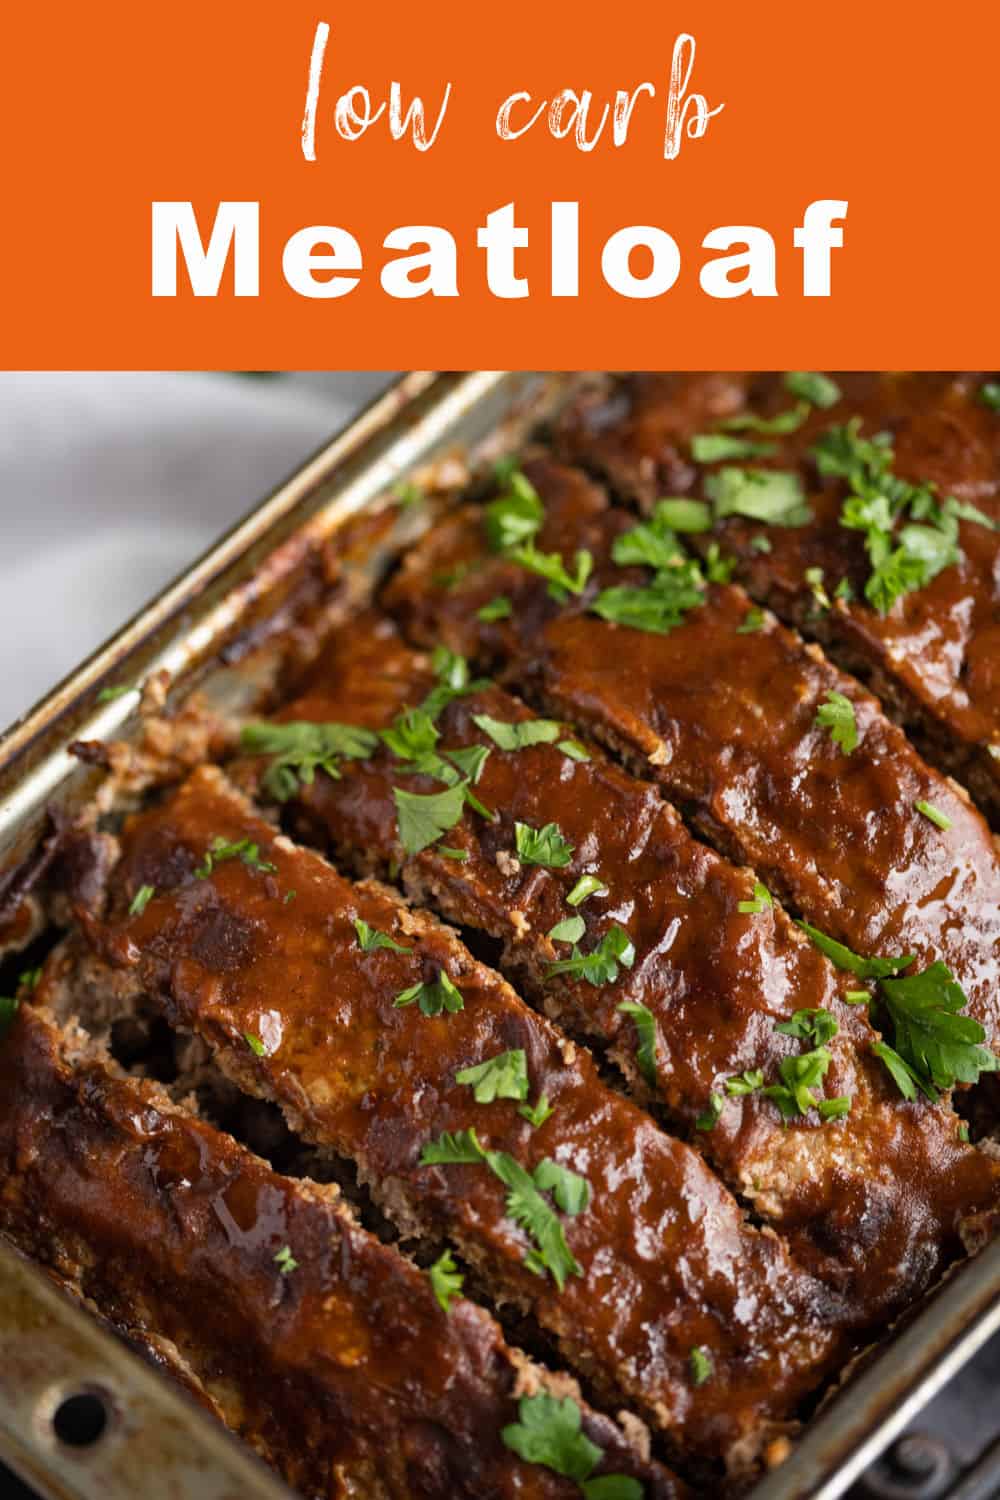 This Low Carb Meatloaf is just as meatloaf should be-- tender and moist, soft but never mushy, cuts easily with a fork, but can be picked up without breaking, oozing juices, but not greasy, meaty and savory-- but, in a healthier low carb version! via @artfrommytable